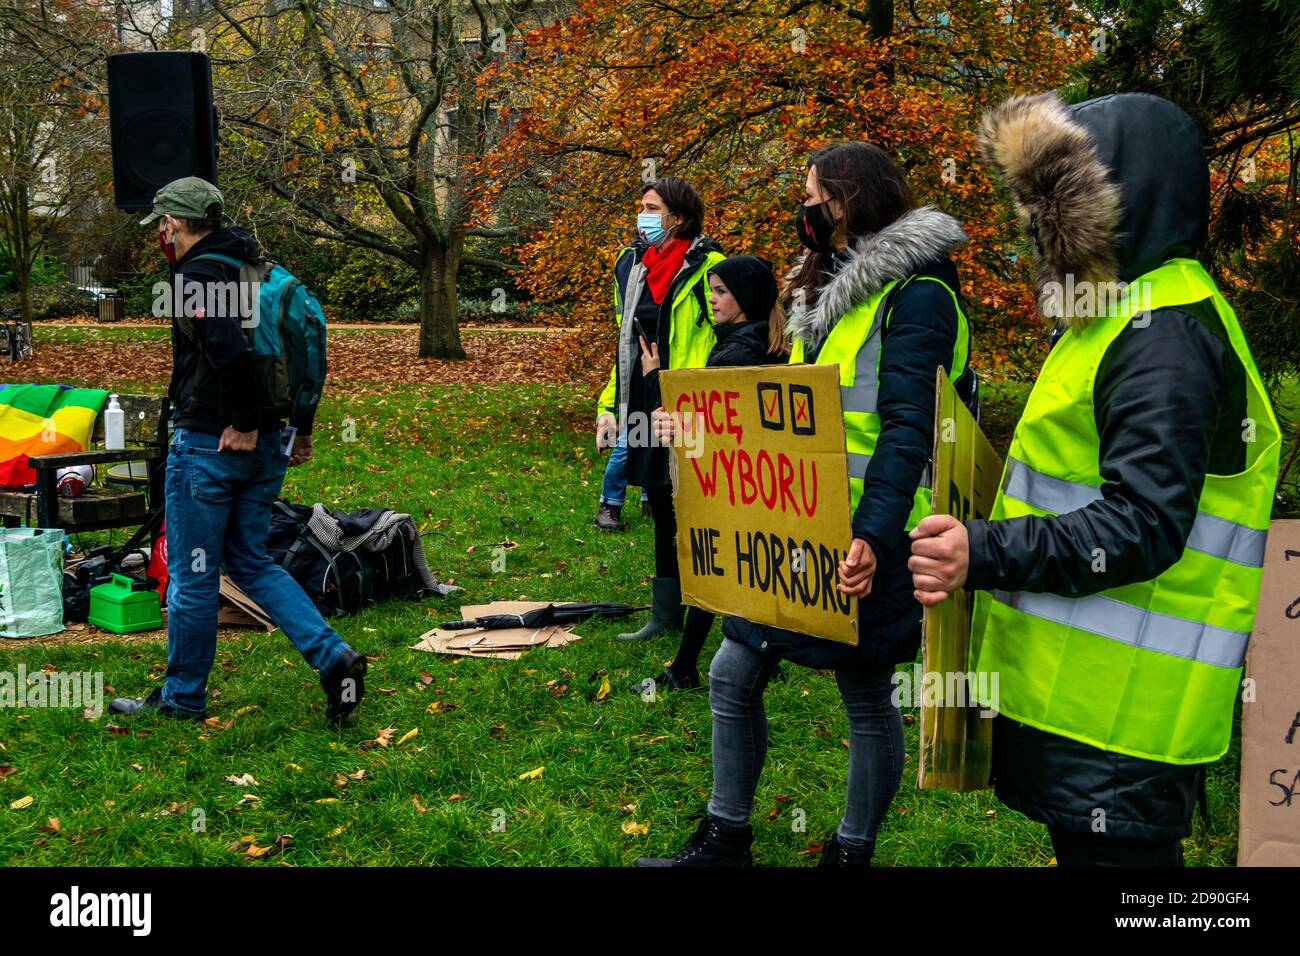 Oxford, United Kingdom - November 1, 2020: Polish pro choice protest in University Parks Oxford, women and men peacefully protesting against the anti Stock Photo